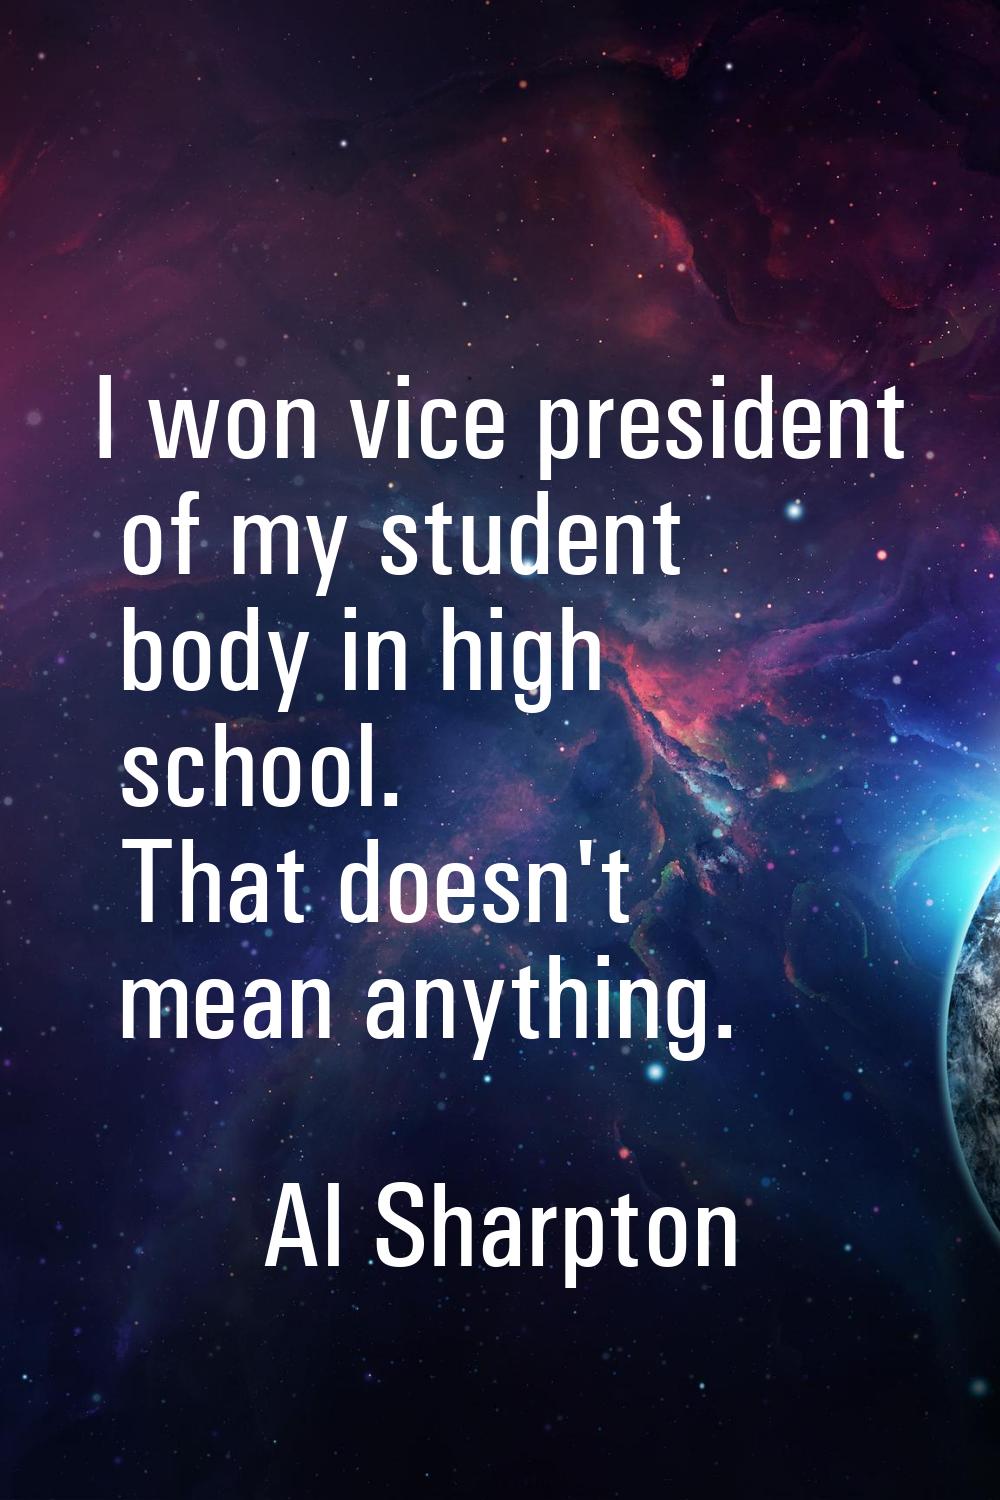 I won vice president of my student body in high school. That doesn't mean anything.